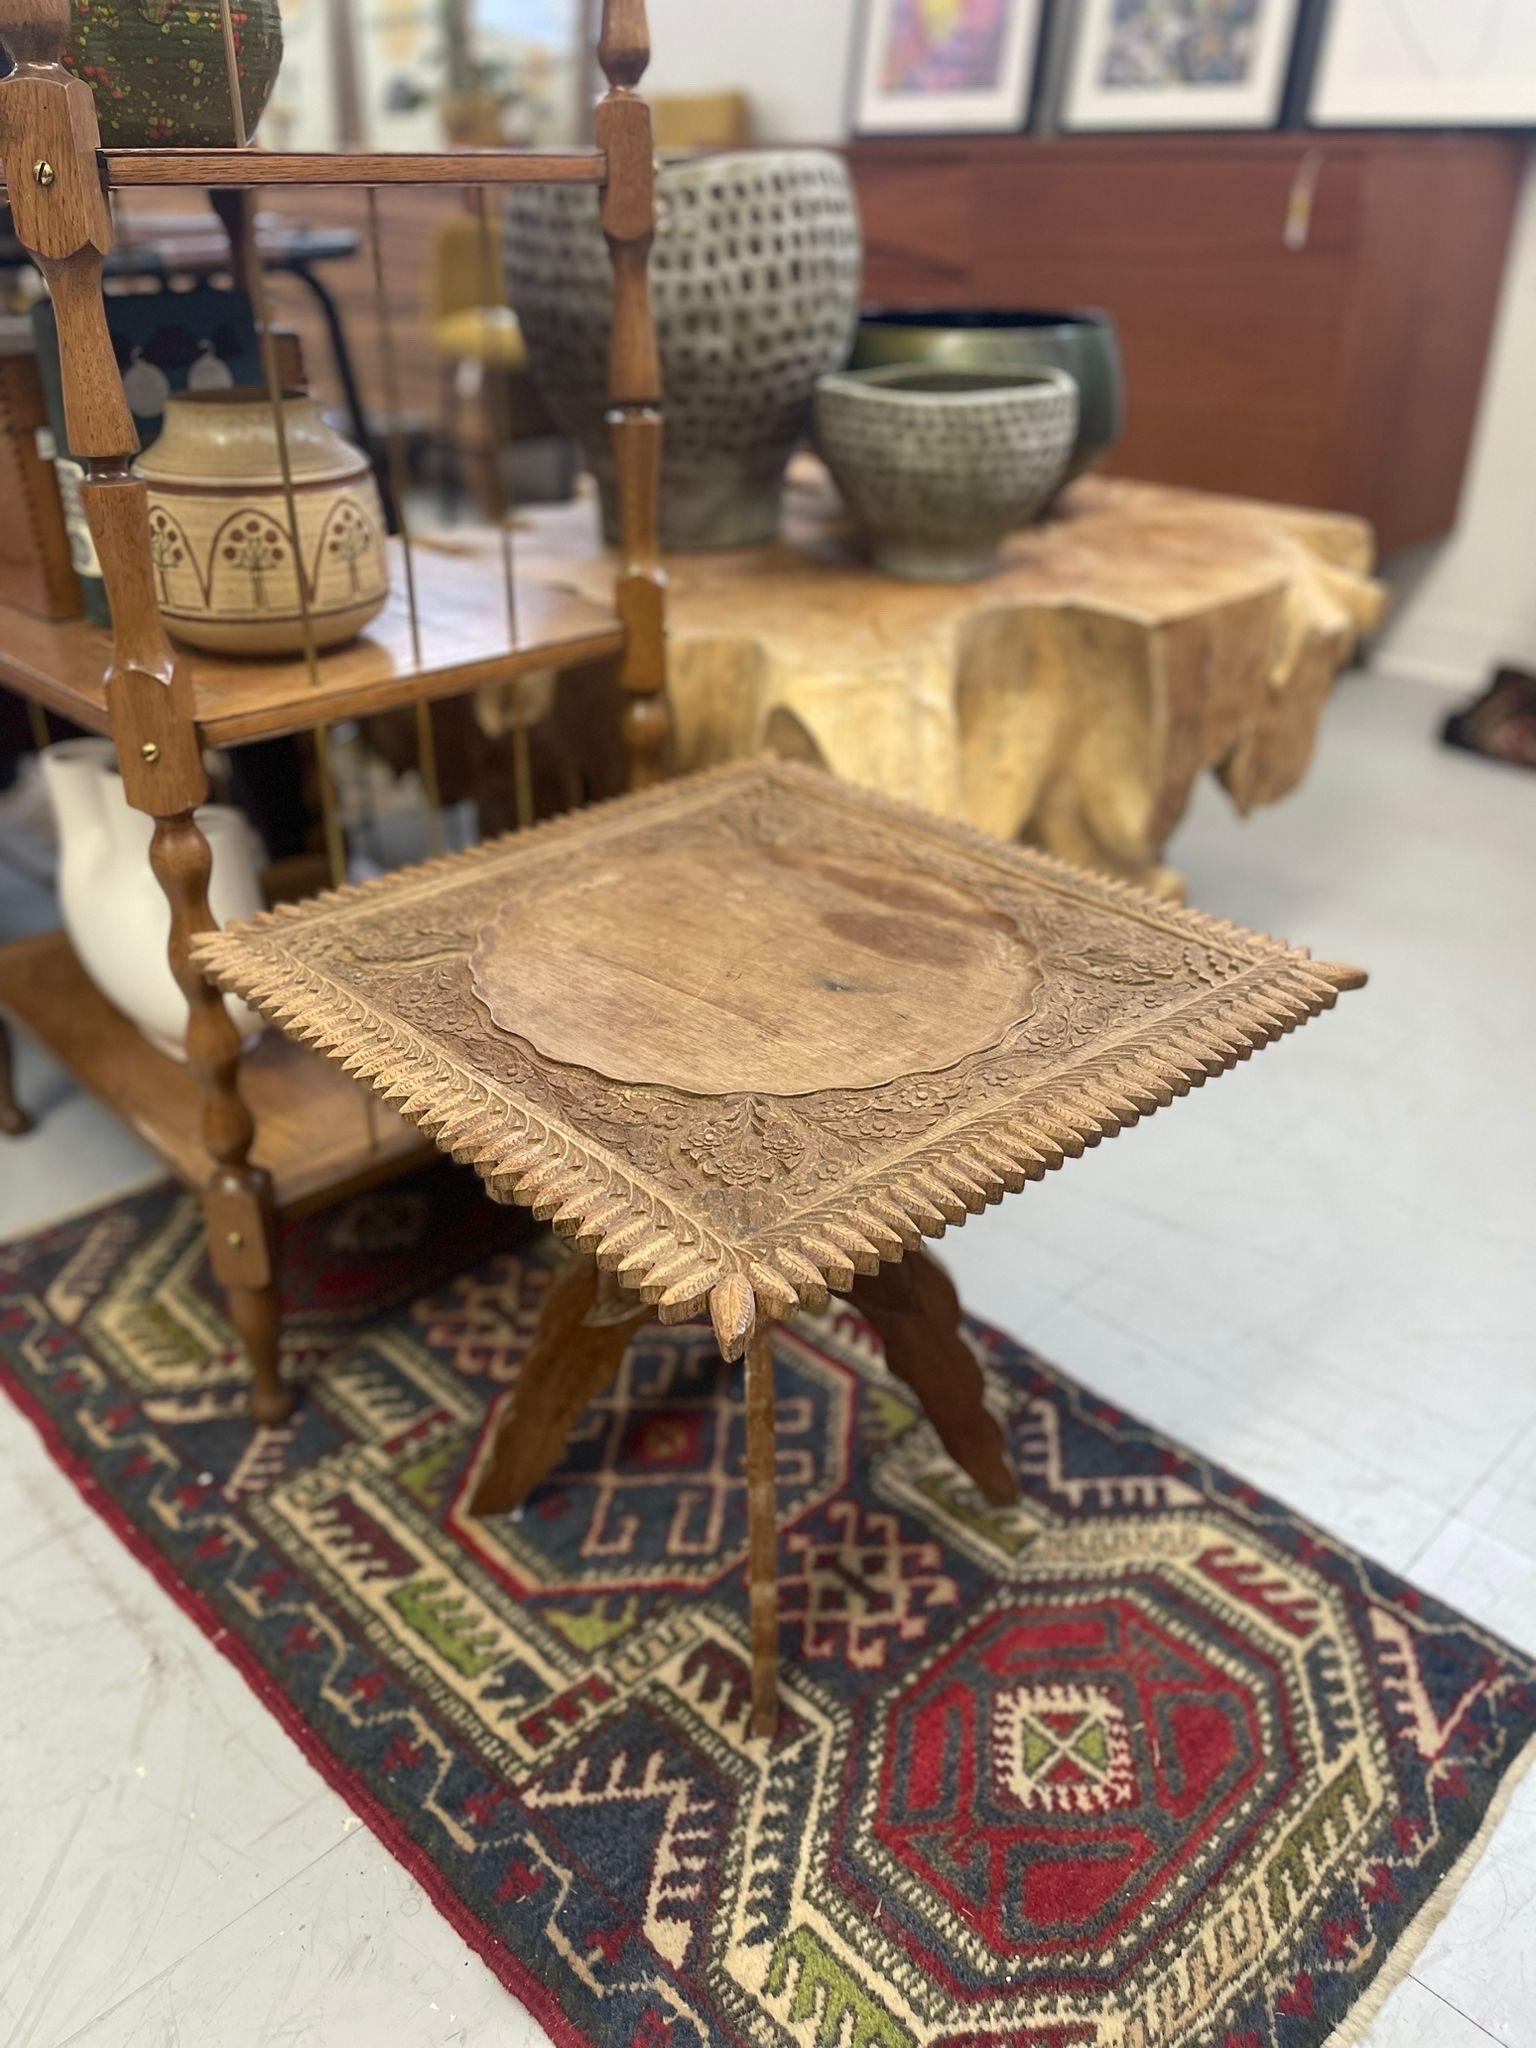 Intricate Carved Floral Motif on the Square top and Legs of this Beautiful Accent Table. The Edges have been Carved in to Leaf Pattern. X- Panel Base. Vintage Condition Consistent with Age as Pictured.

Dimensions. 18 W ; 18 D ; 16 H